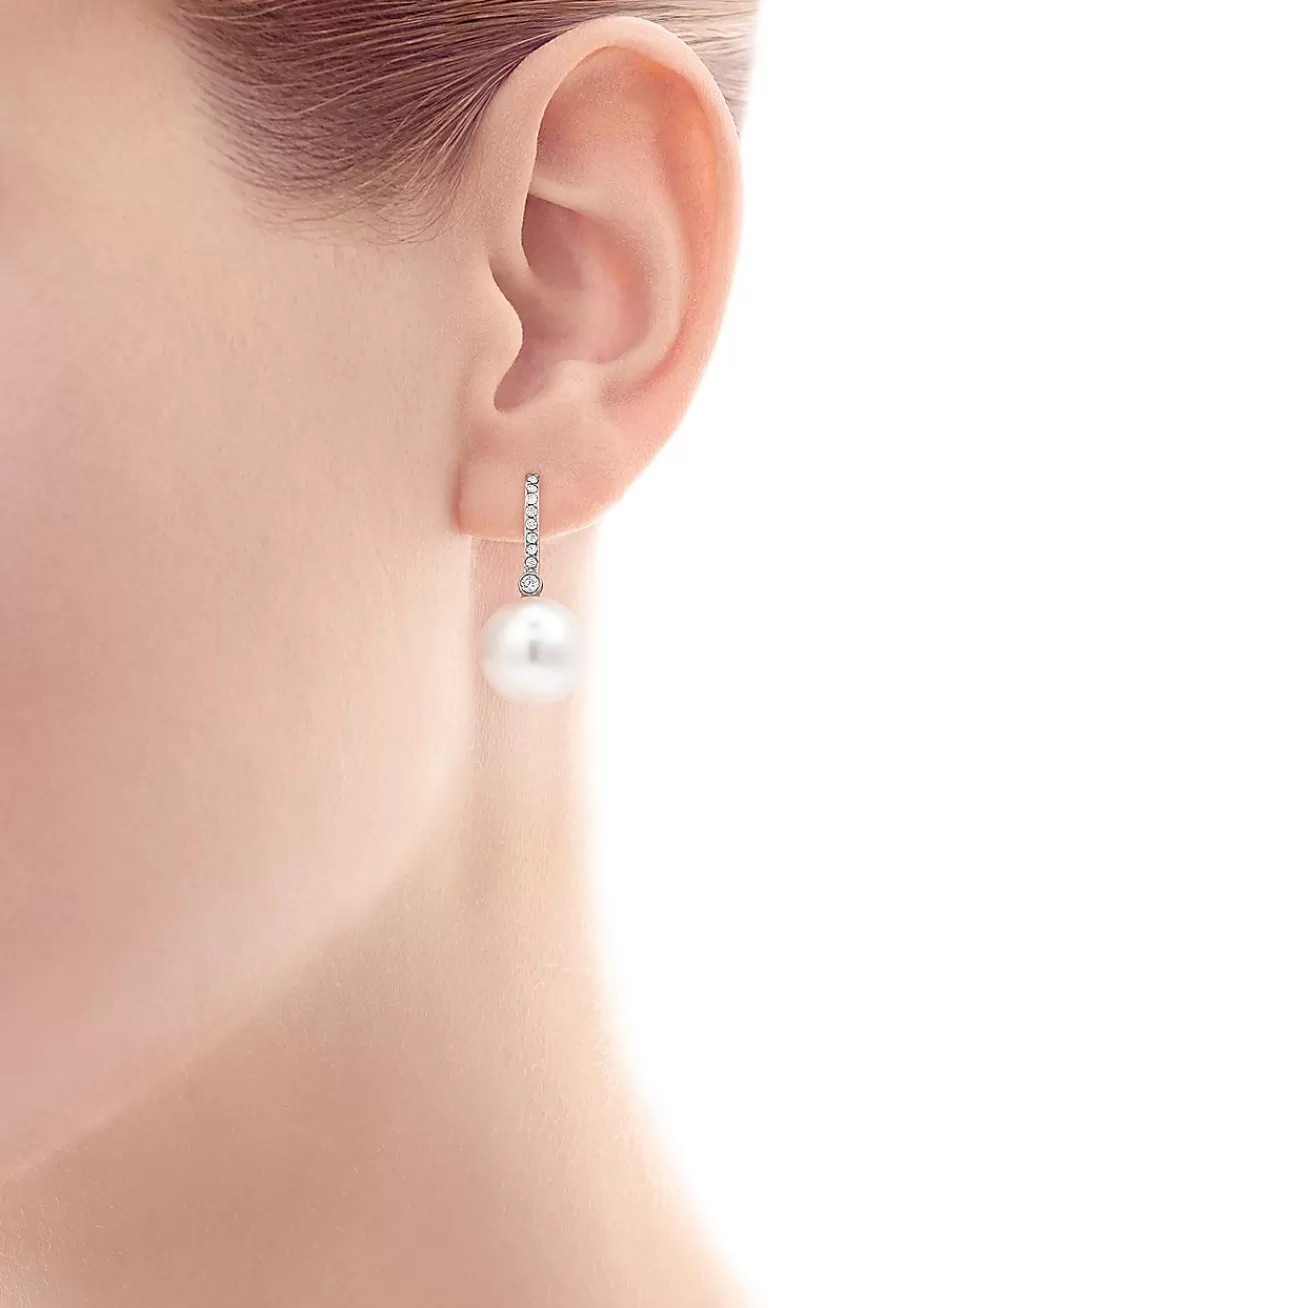 Tiffany & Co. Tiffany South Sea Noble earrings in platinum with cultured pearls and diamonds. | ^ Earrings | Platinum Jewelry